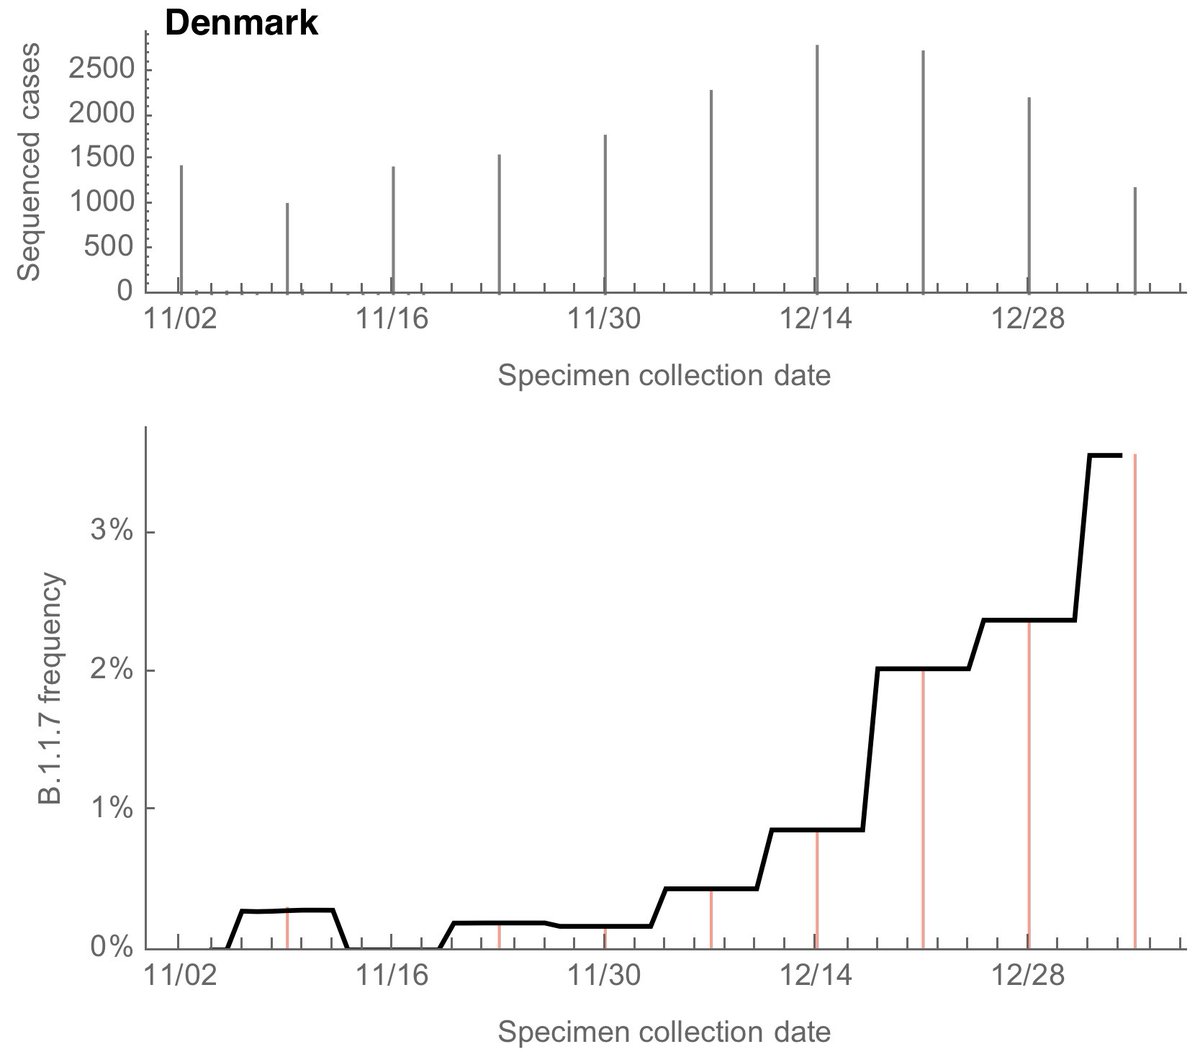 We can do a similar analysis of genomic data from Denmark where we see an increase in B.1.1.7 frequency to ~3% over the course of December. Sparser bars are due to Denmark releasing specimen collection dates by week rather than by day. 8/13